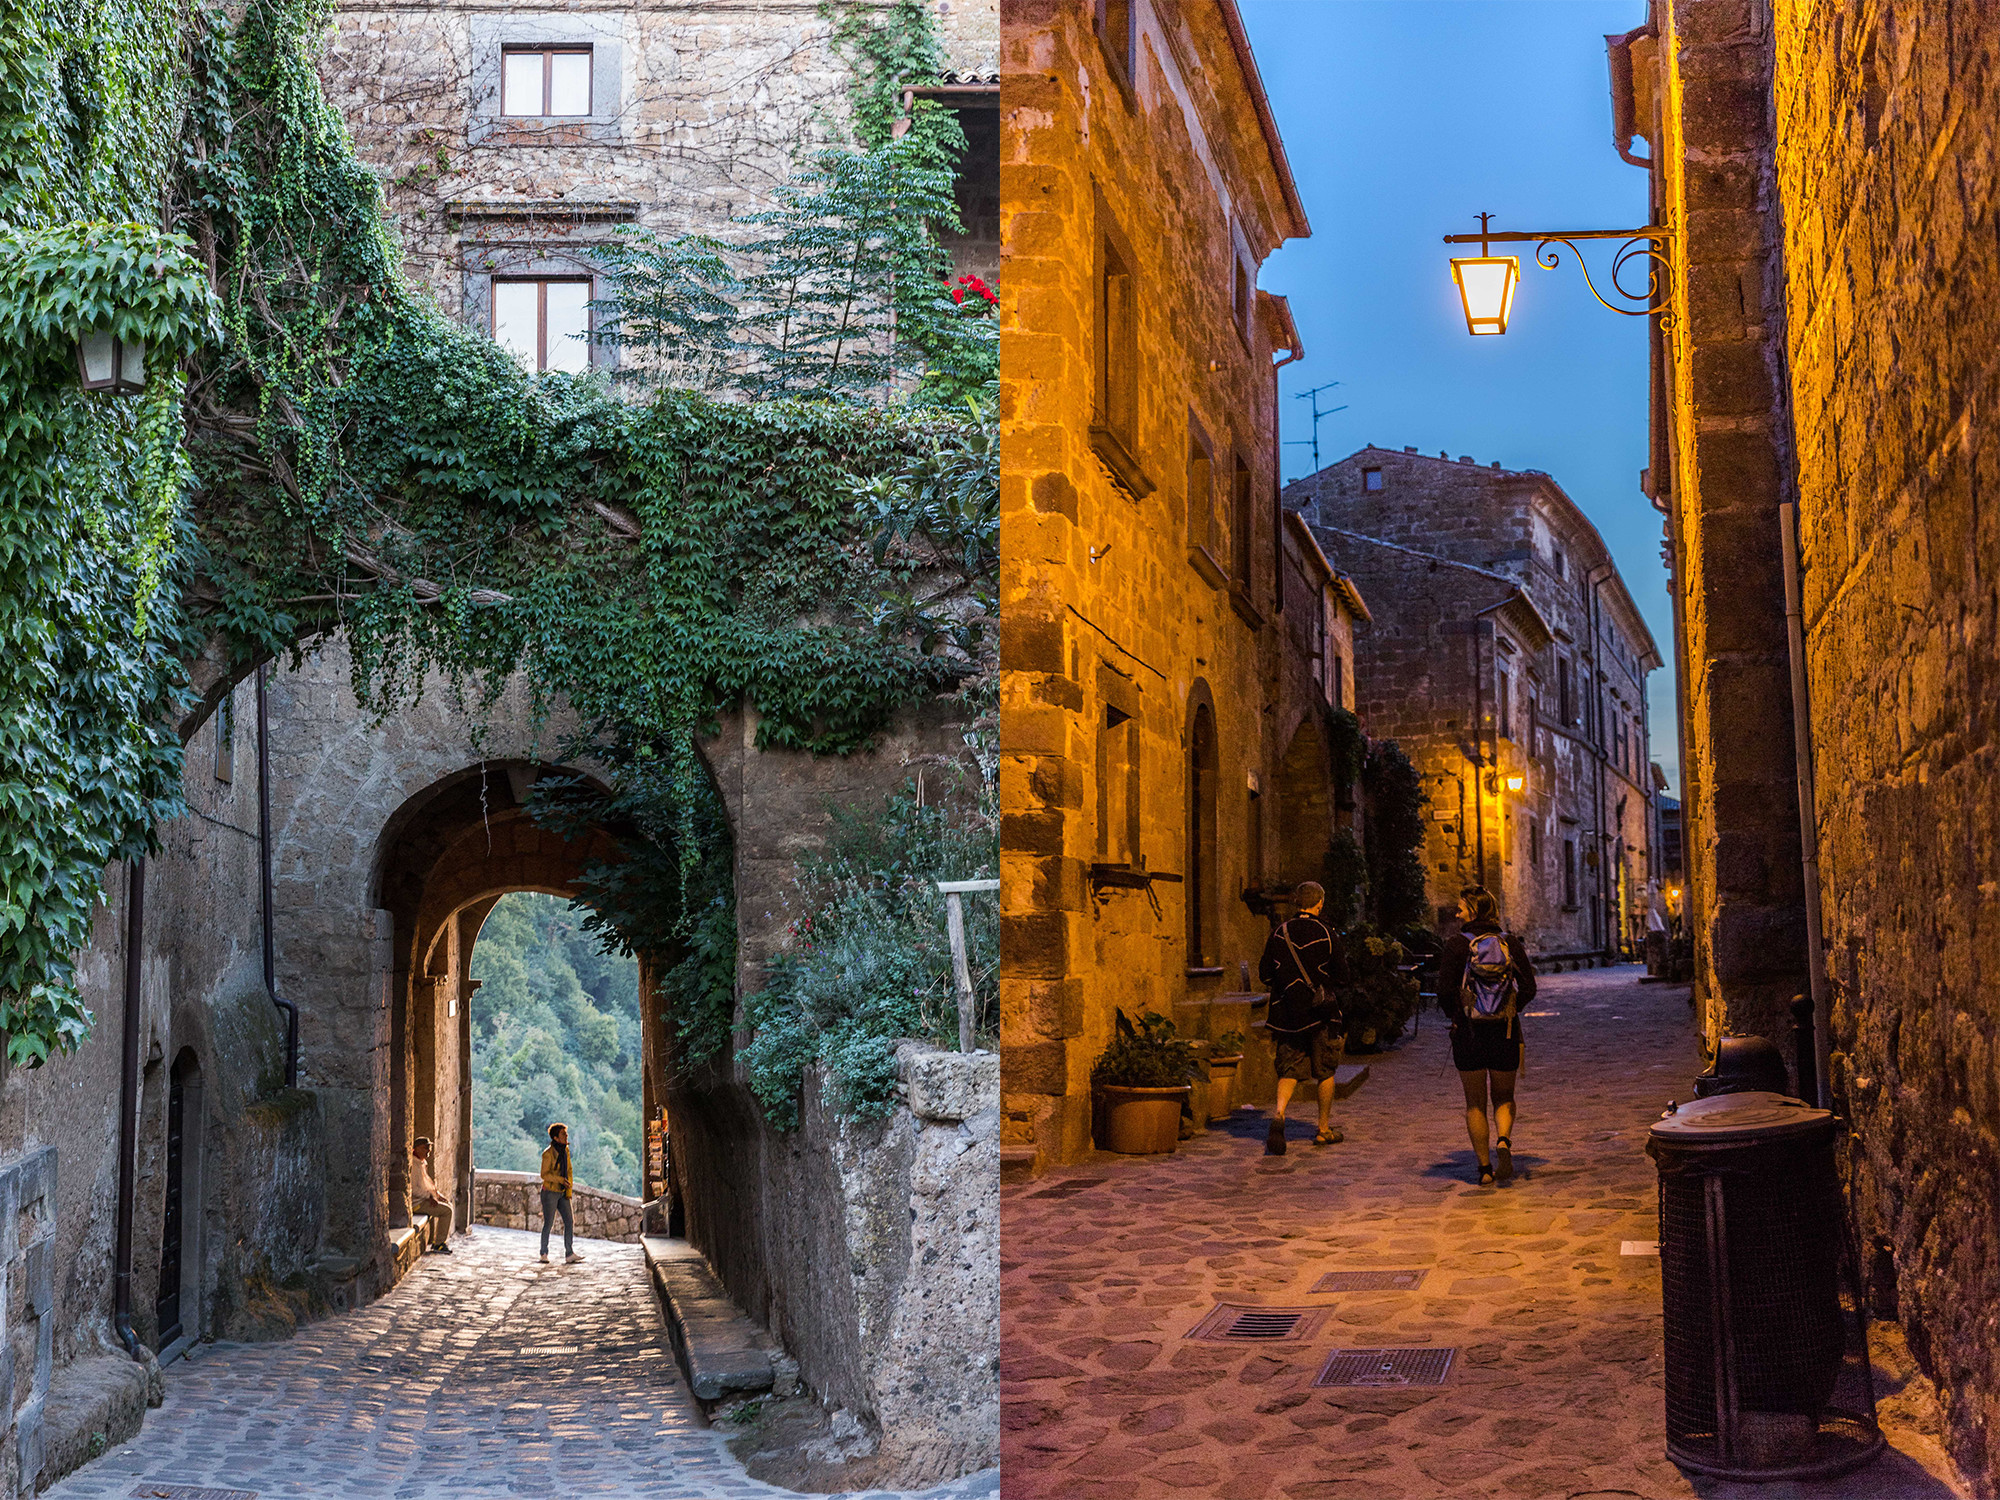 Photos: Visit a crumbling medieval town that's slowly falling off a ...